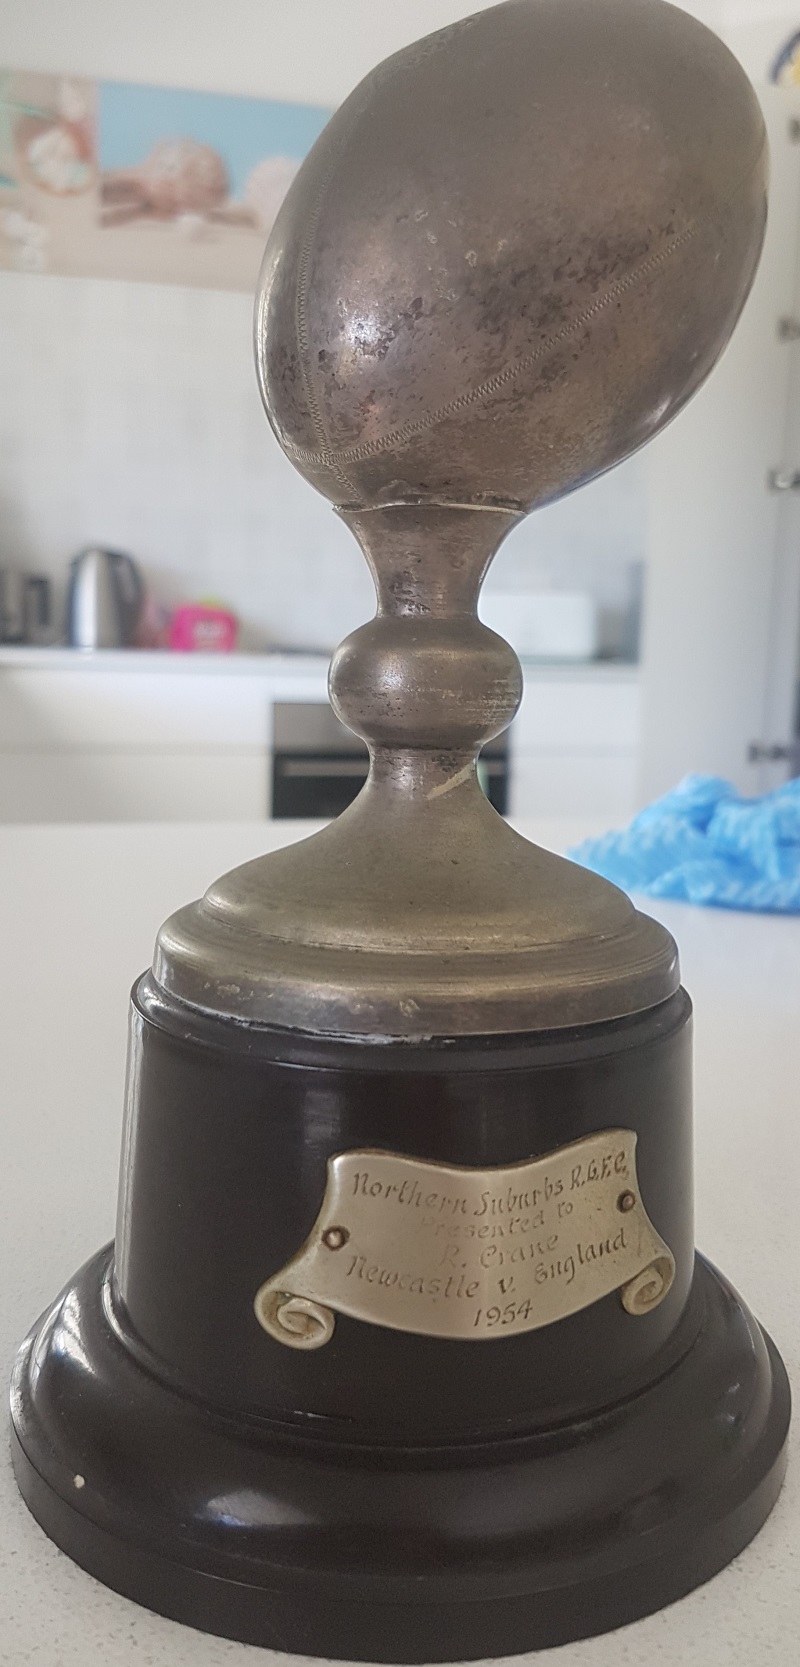 Trophy from Northern Suburbs presented to Bob Crane on representing Newcastle against England 1954